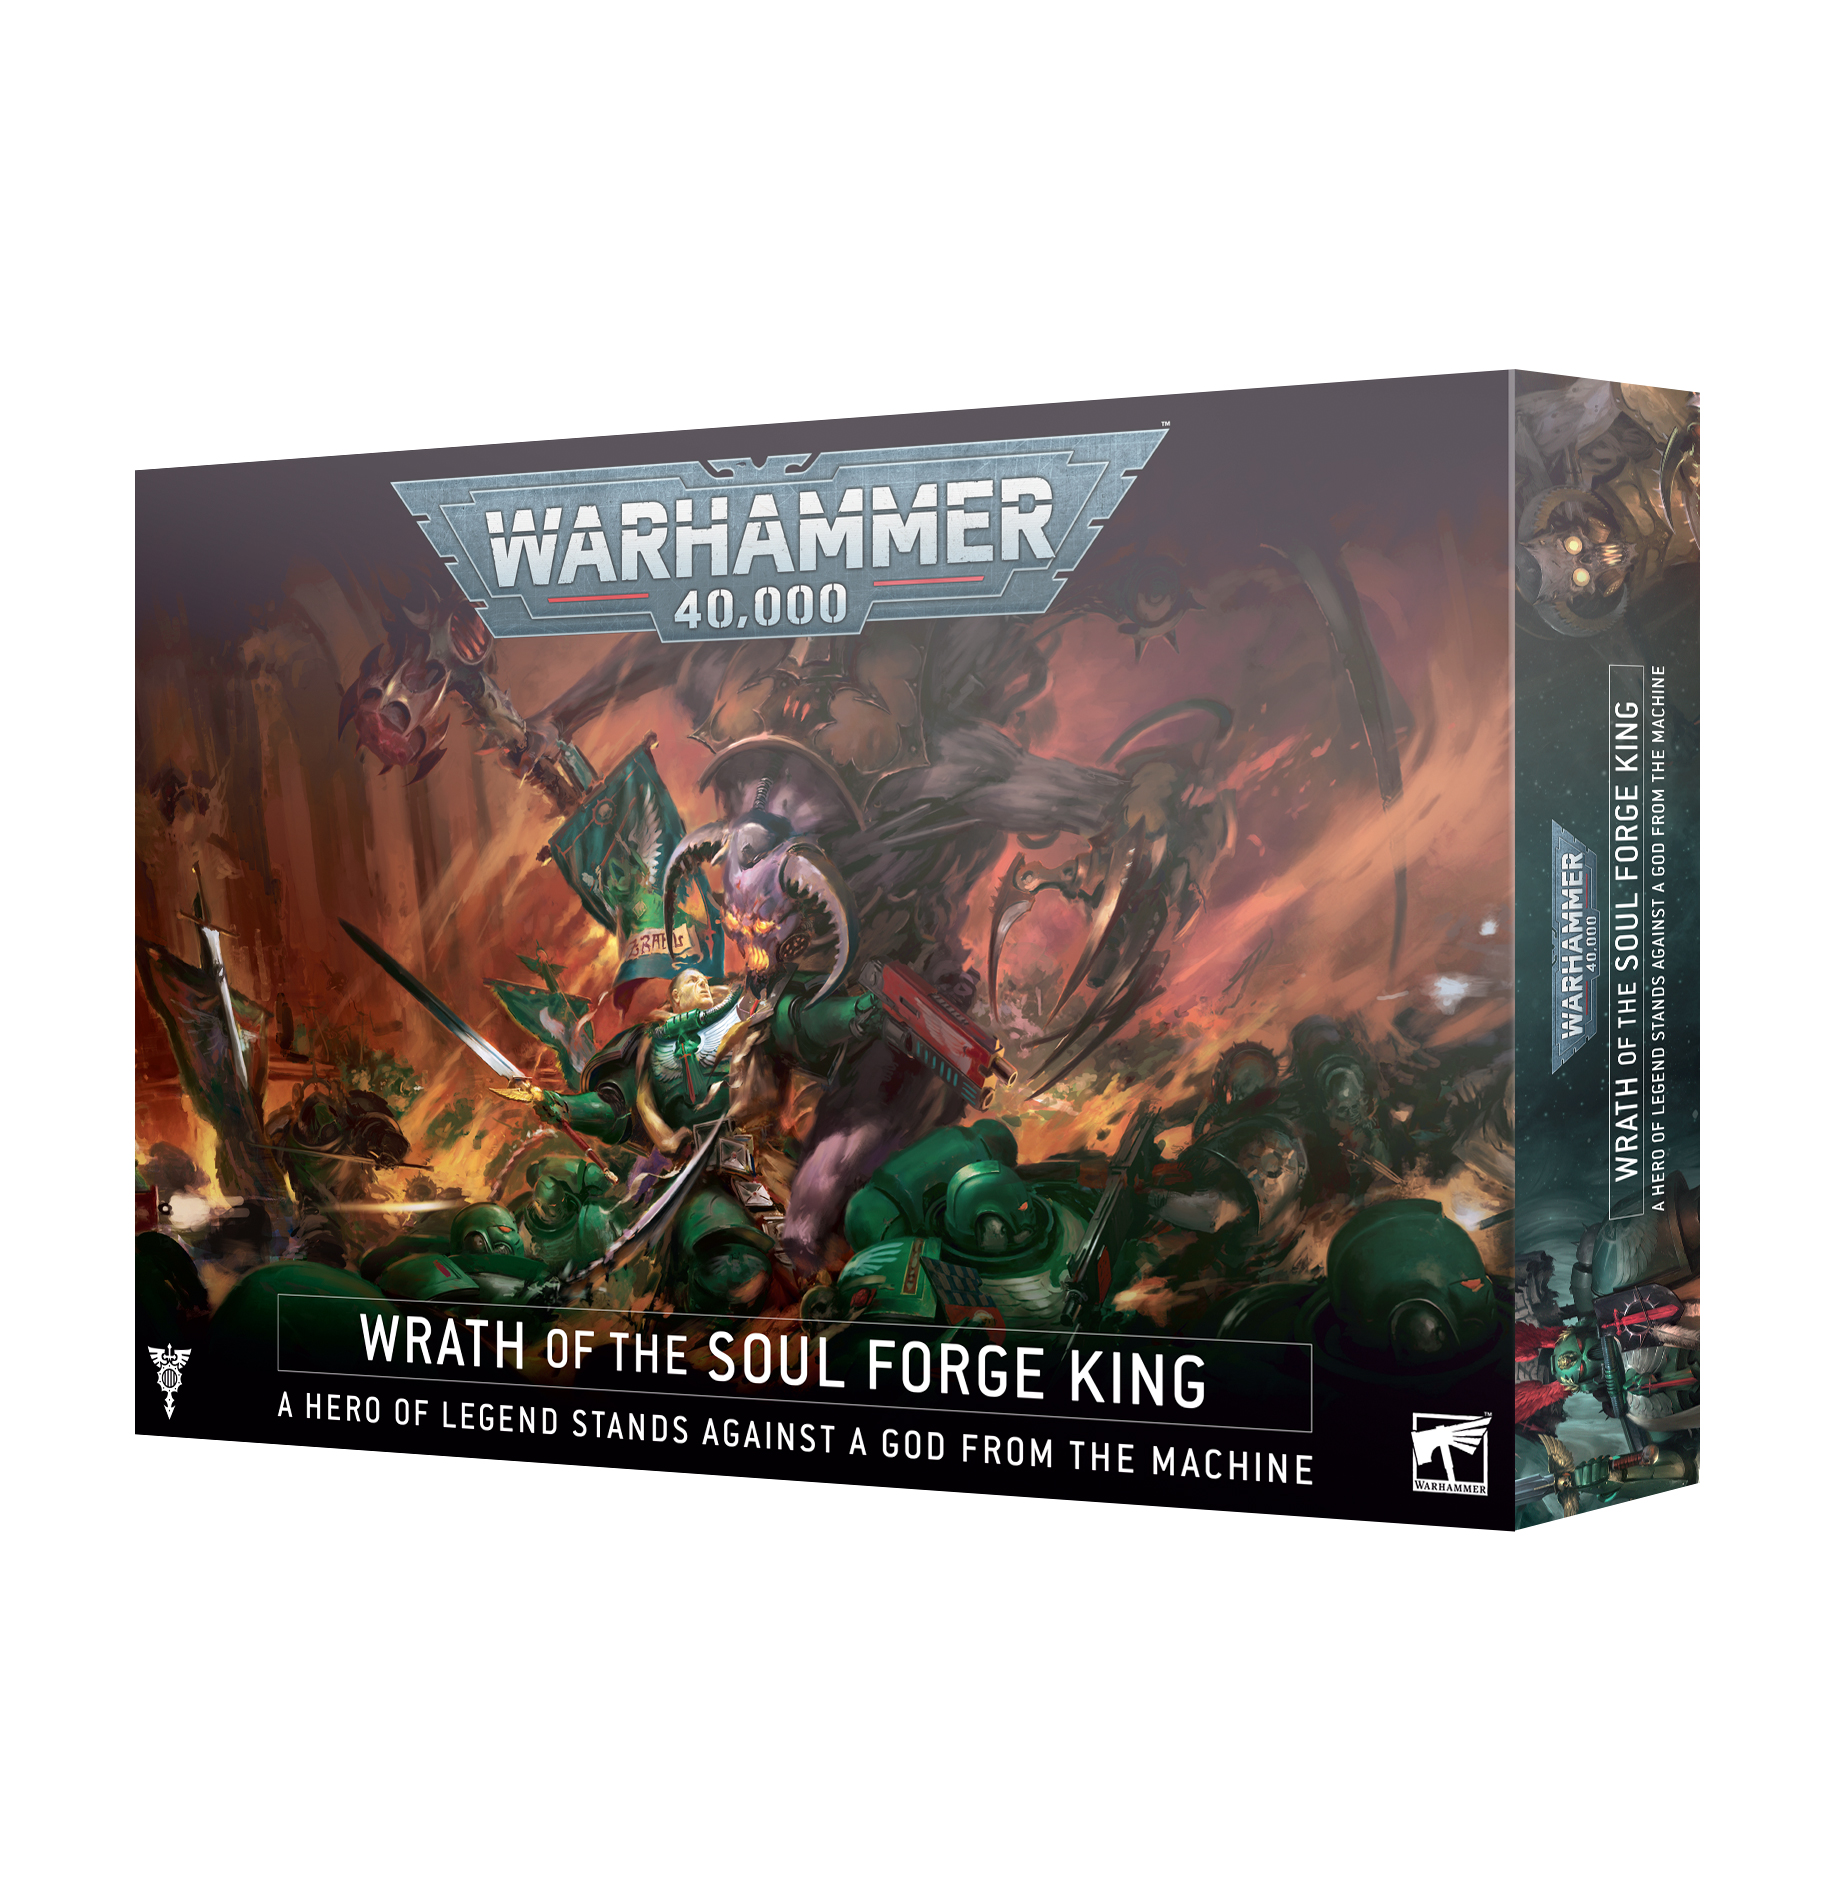 Warhammer 40,000: Wrath of the Soulforge King 